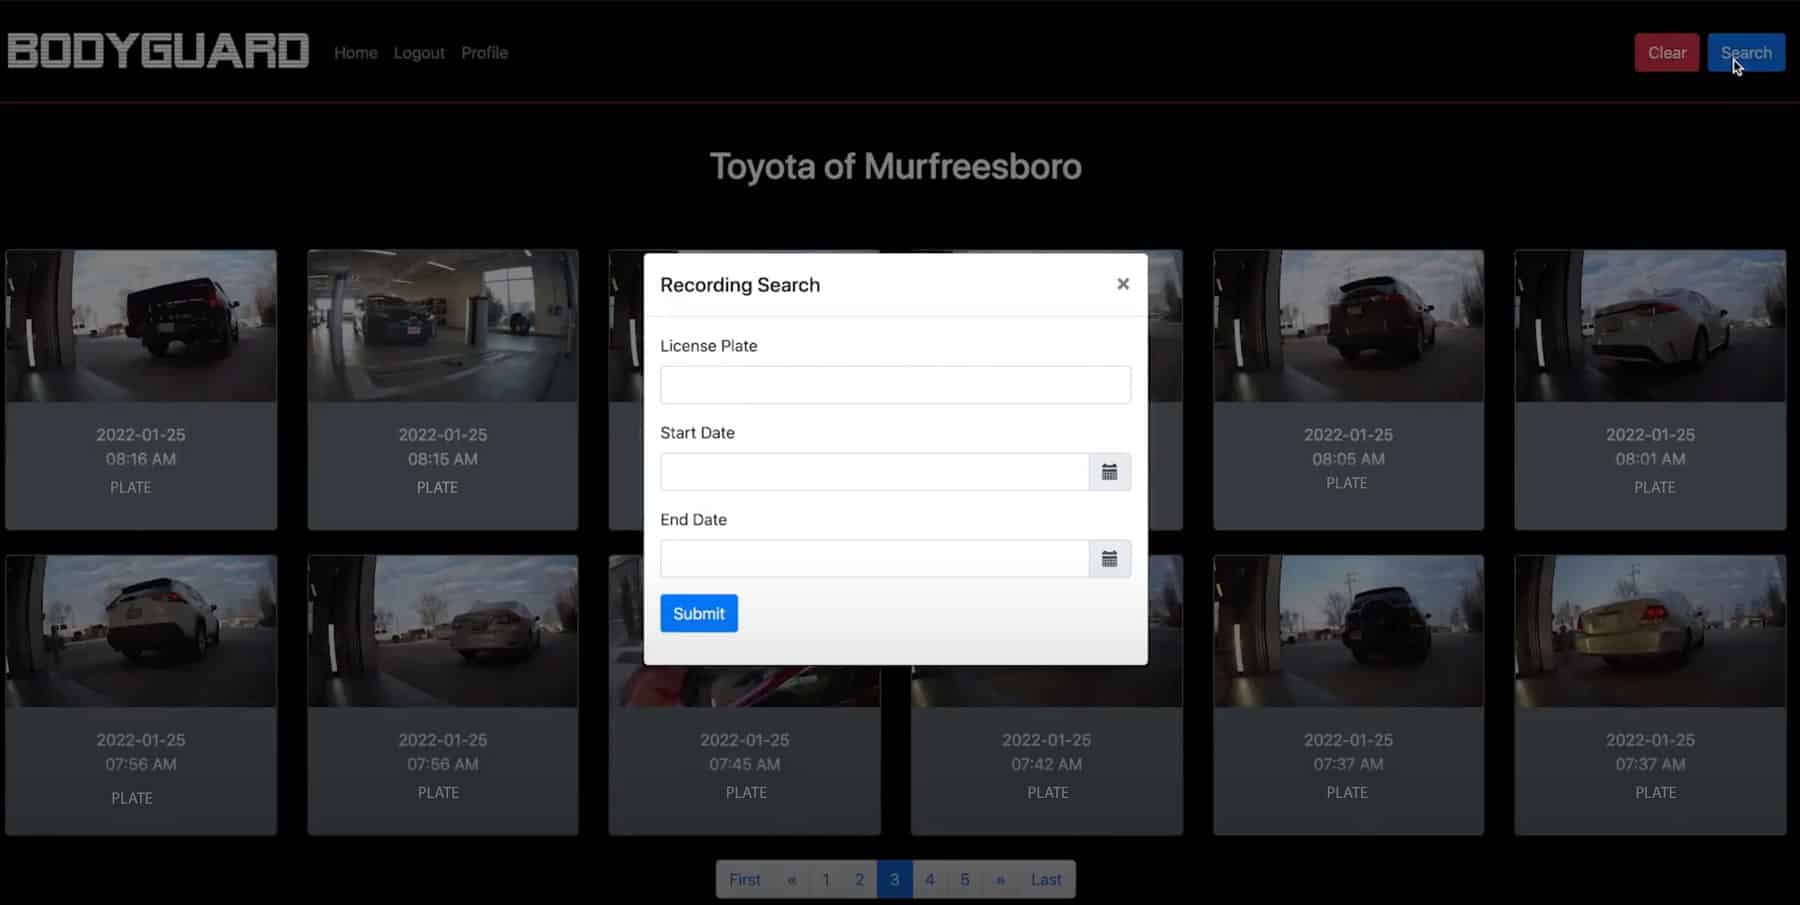 A desktop view of the Bodyguard interface shows the ability to search camera recordings by typing in license plate information and dates.